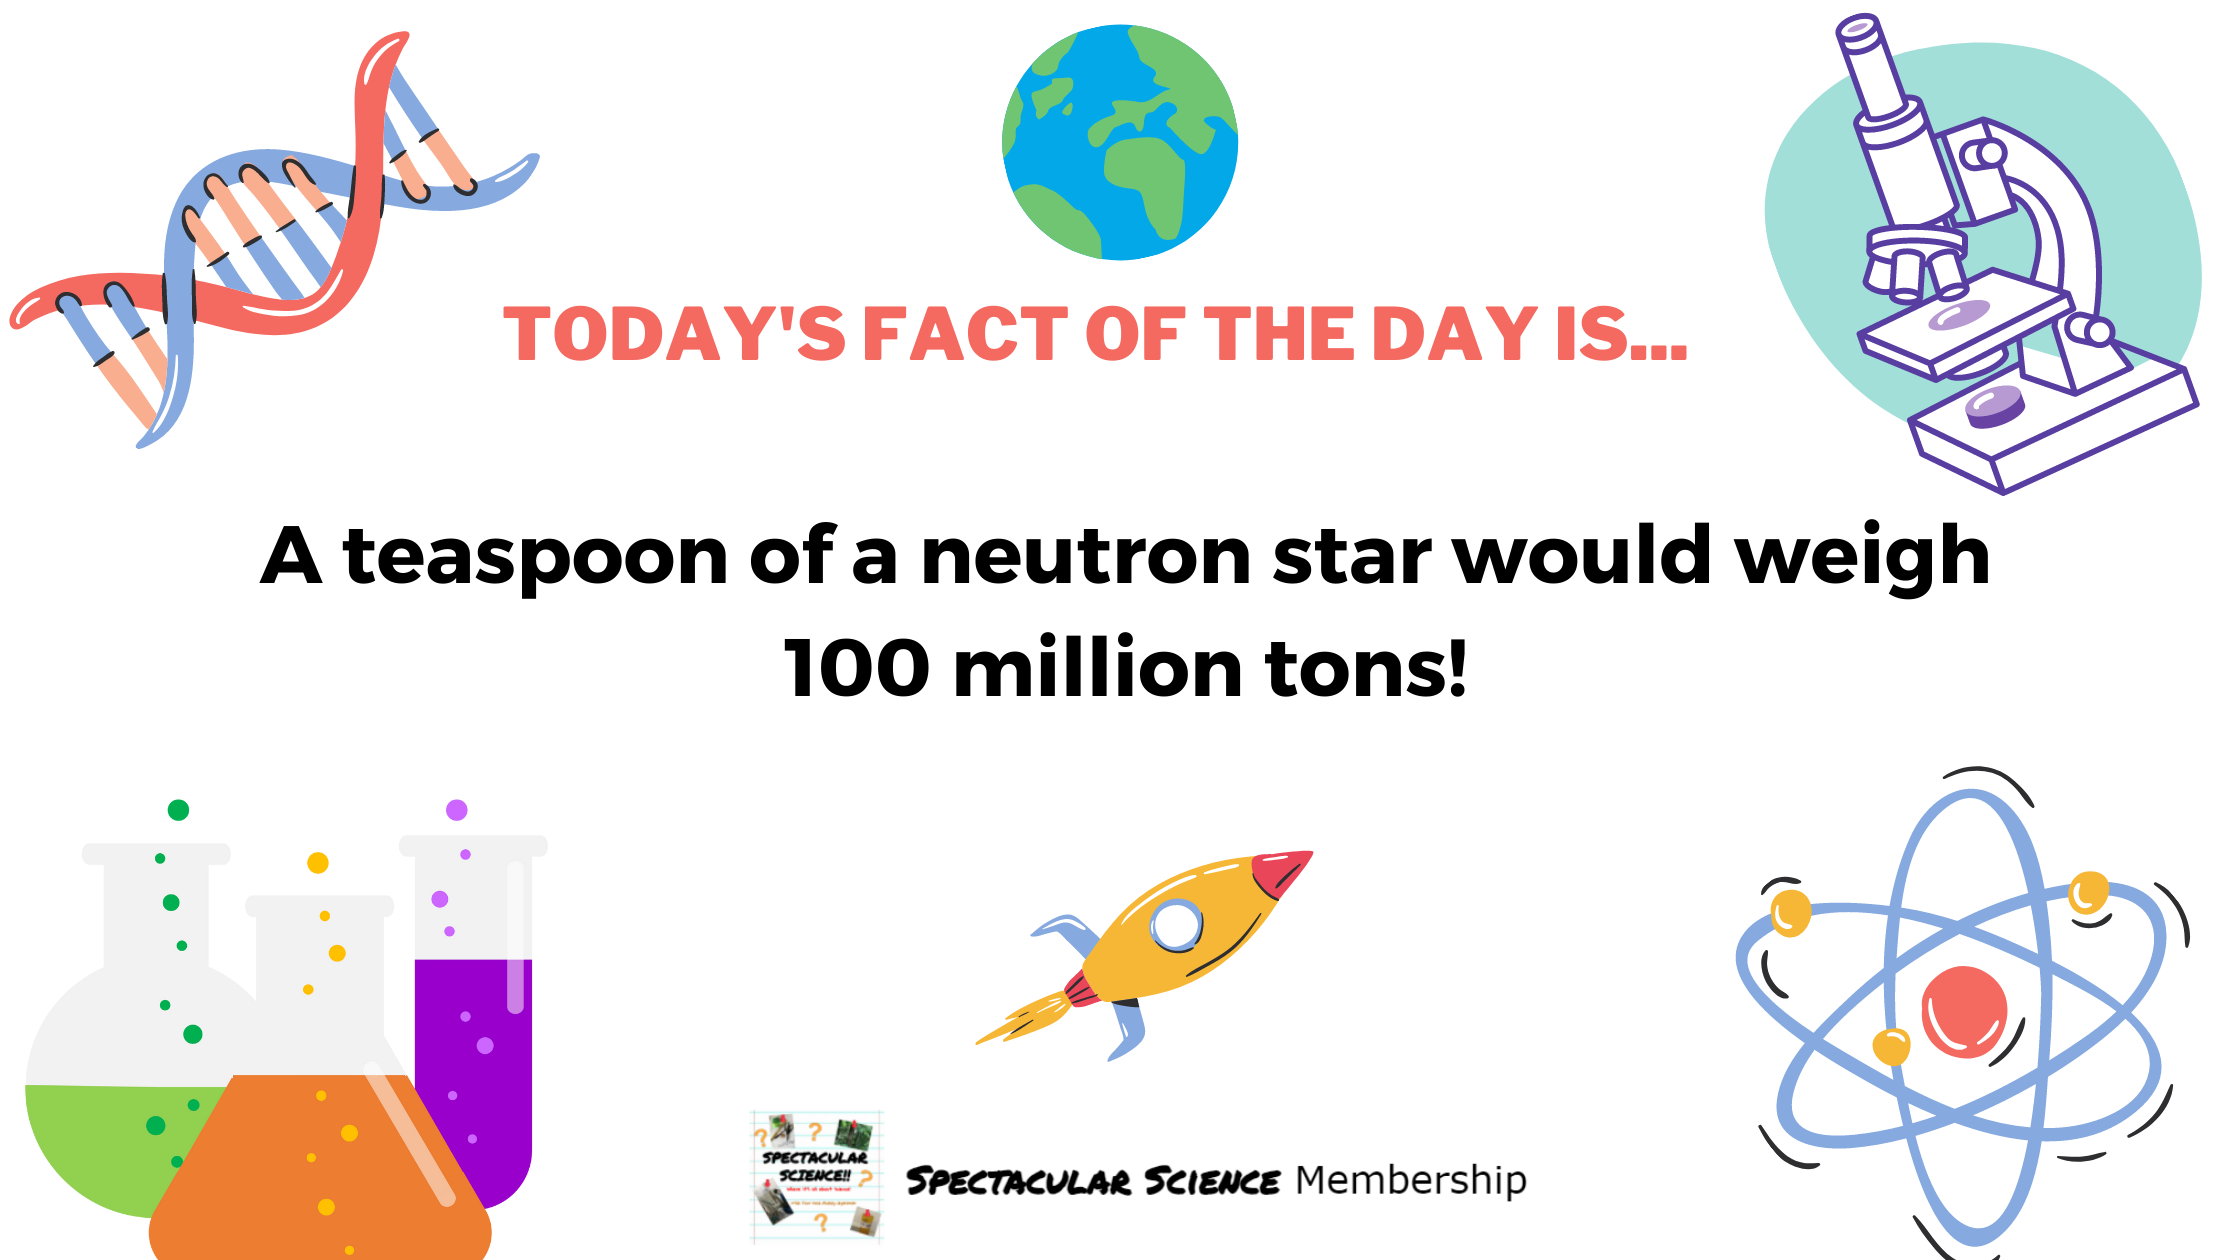 Fact of the Day Image Dec. 15th